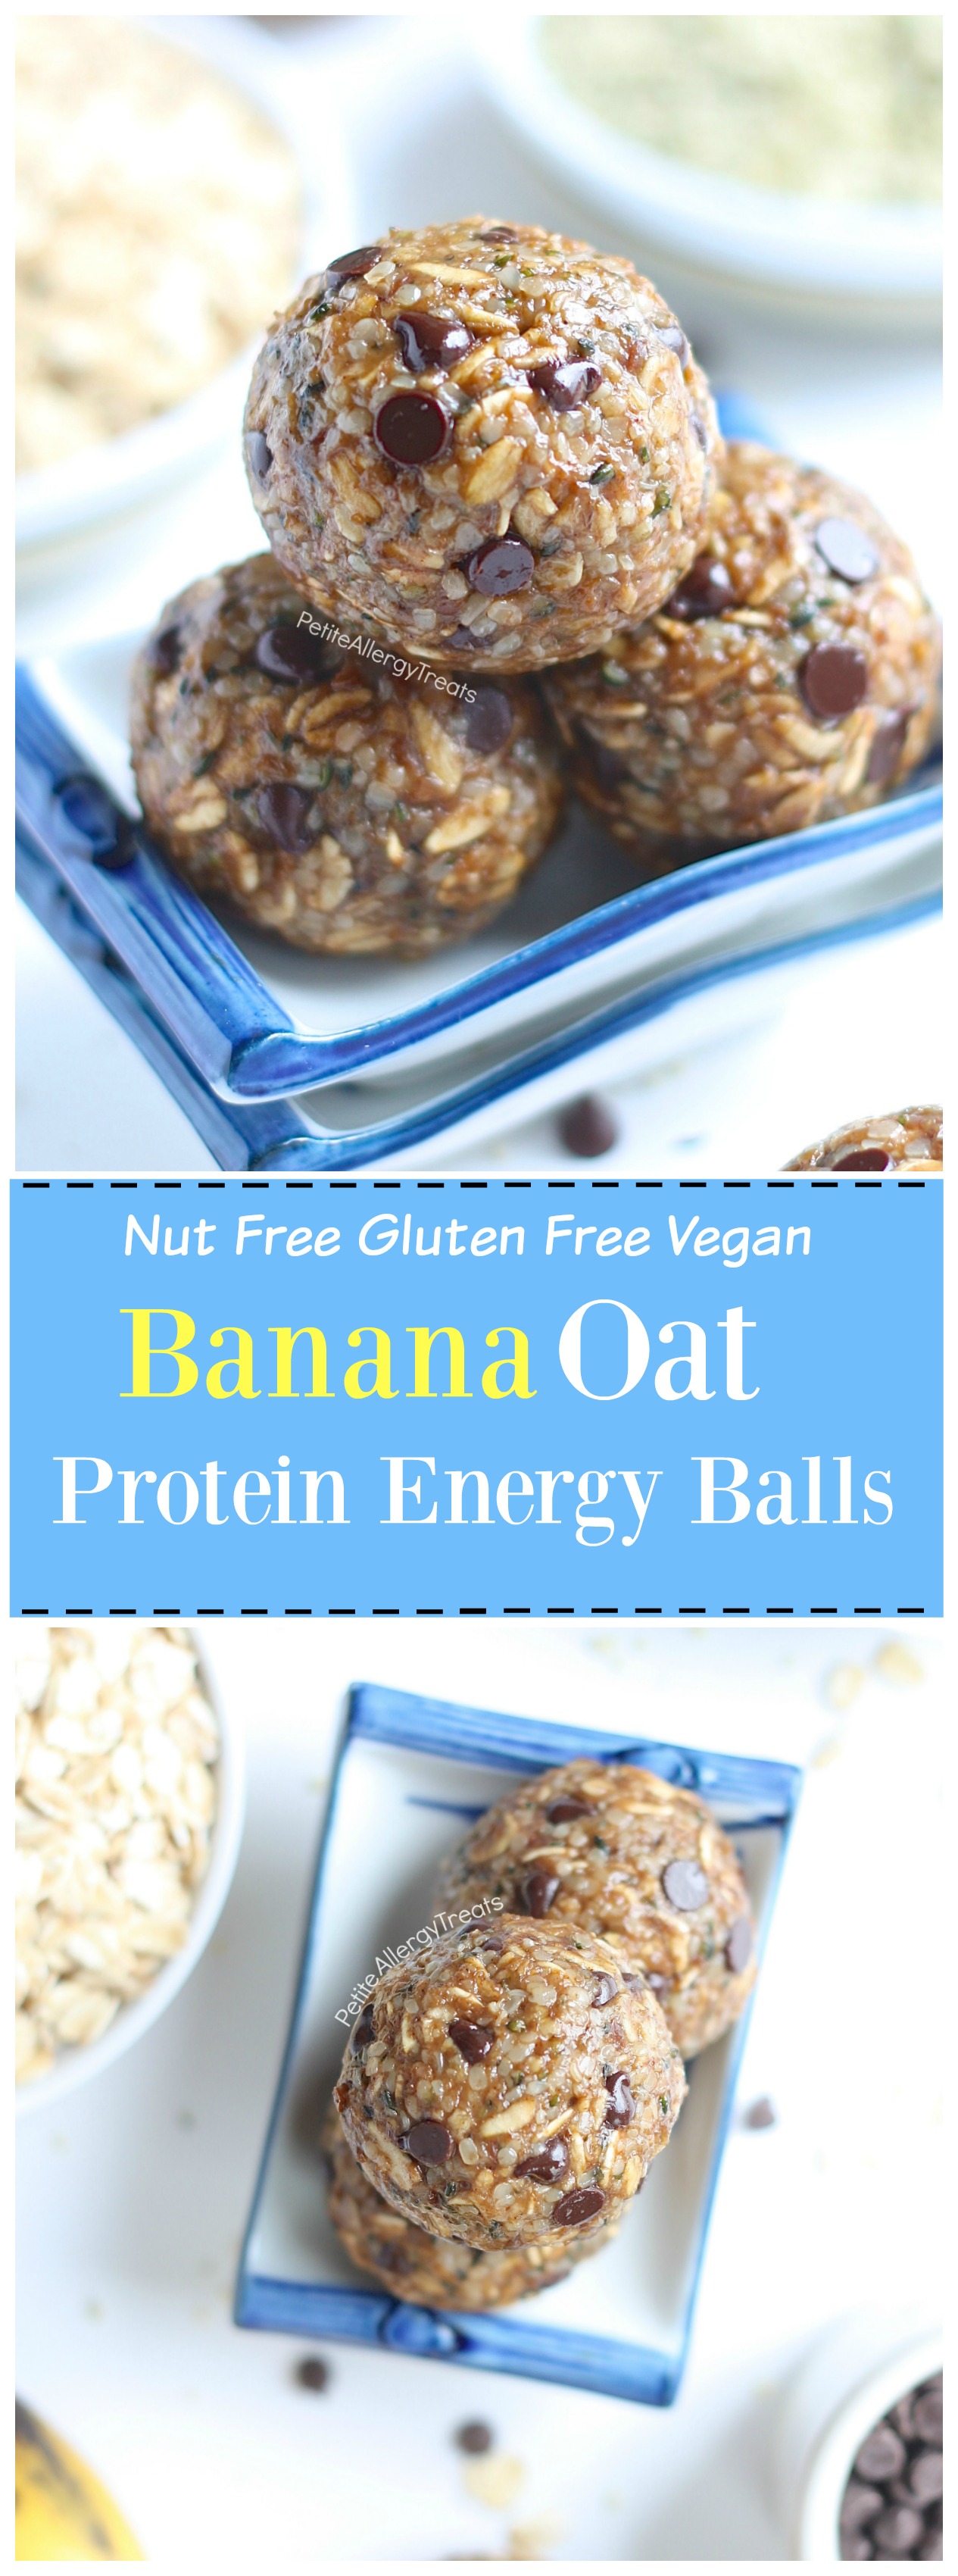 Nut Free Banana Oat Protein Energy Balls (gluten free dairy free vegan) Recipe- No bake healthy snack banana oat balls packed with protein, fiber and sweetened with banana. Food Allergy Friendly